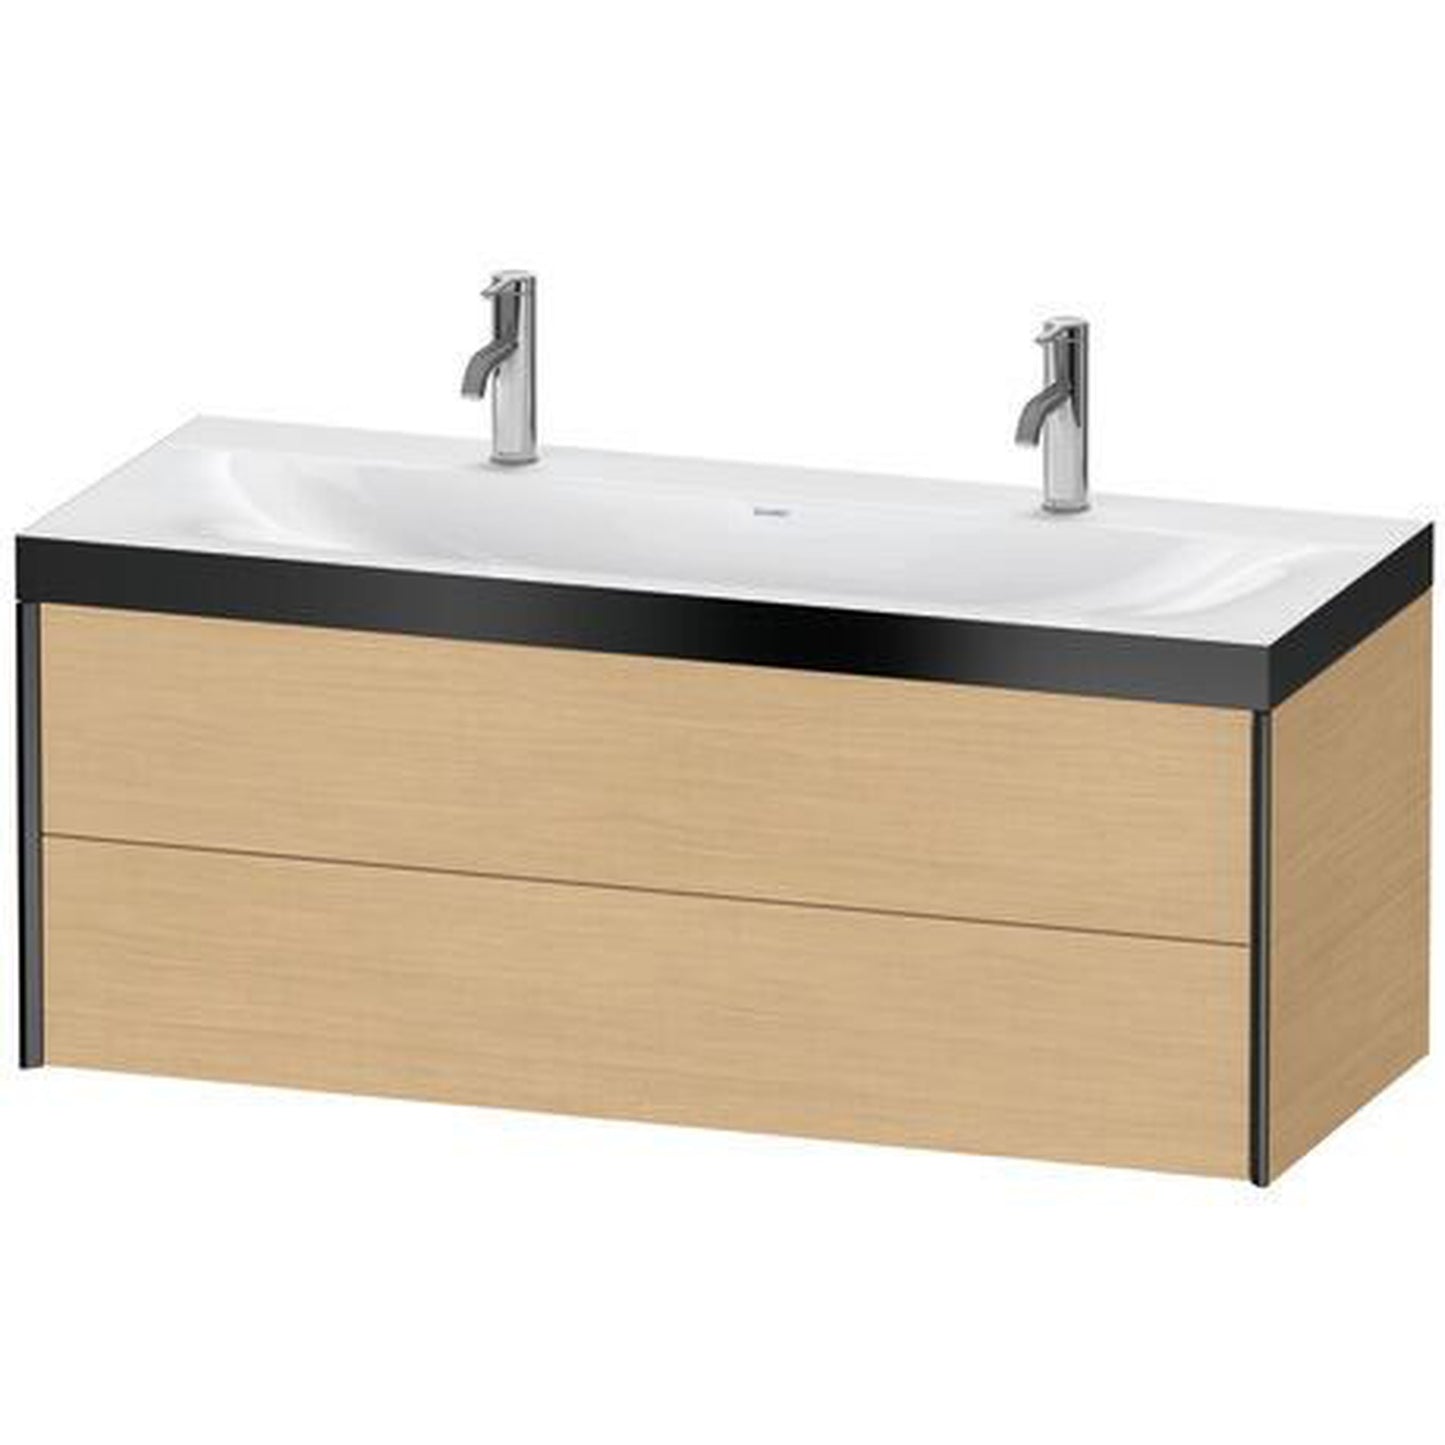 Duravit Xviu 47" x 20" x 19" Two Drawer C-Bonded Wall-Mount Vanity Kit With One Tap Hole, Natural Oak (XV4618OB230P)